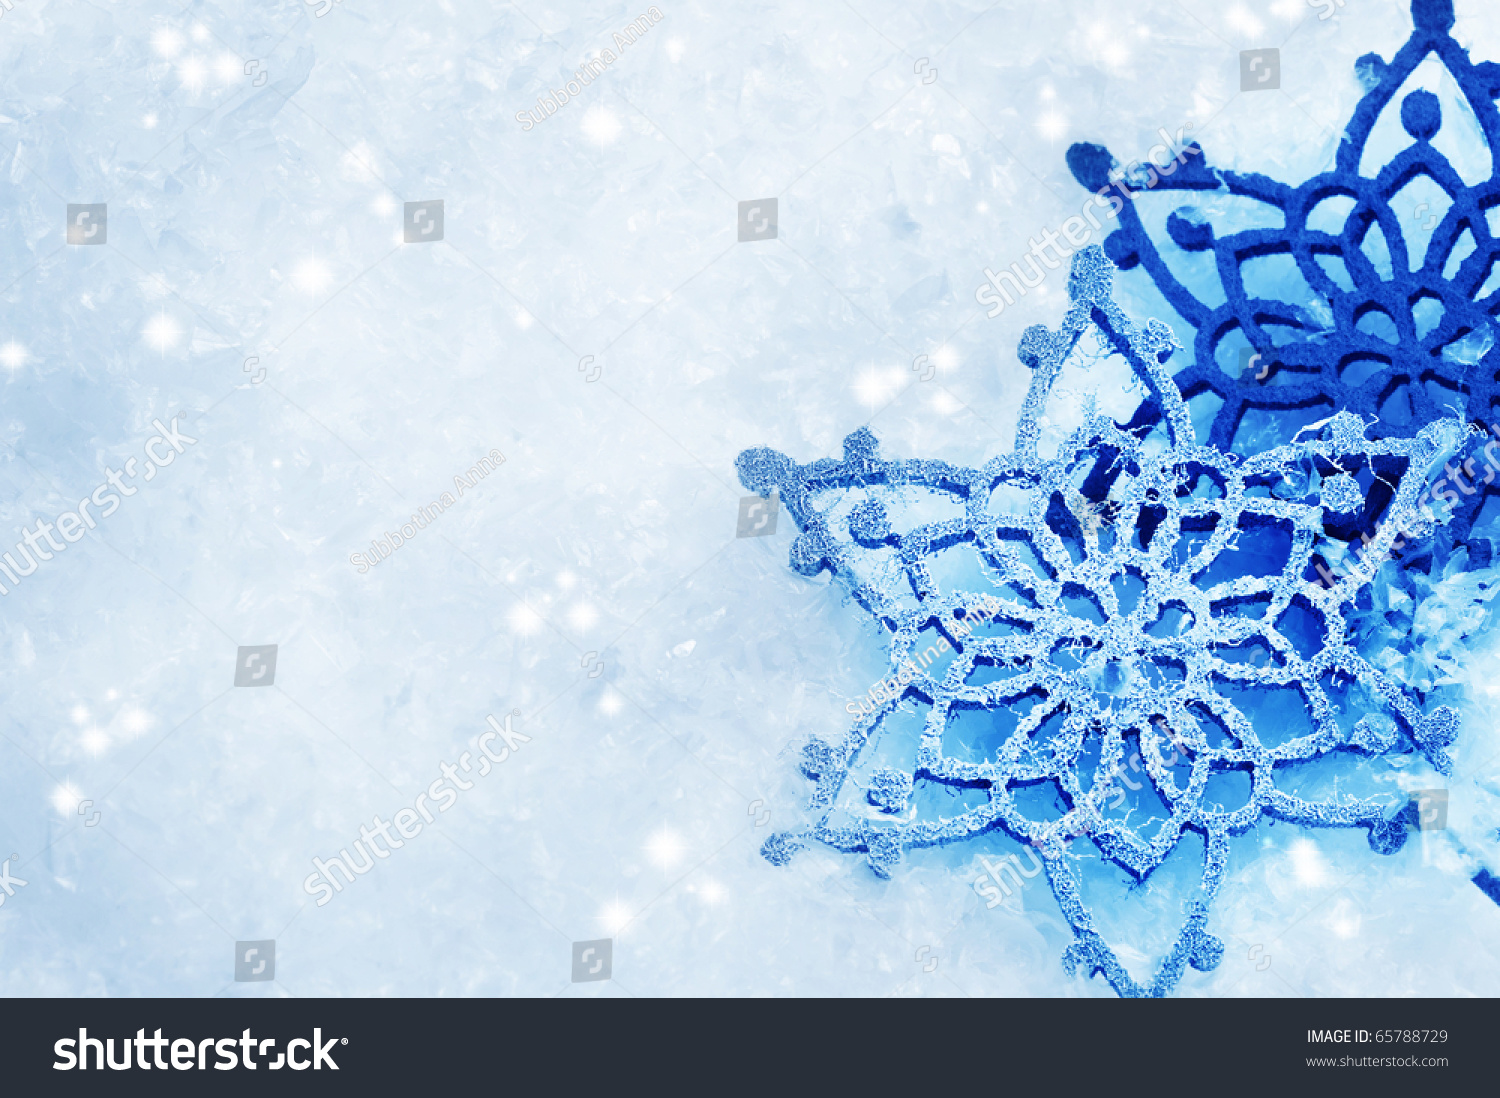 snowflake clipart without background - photo #28